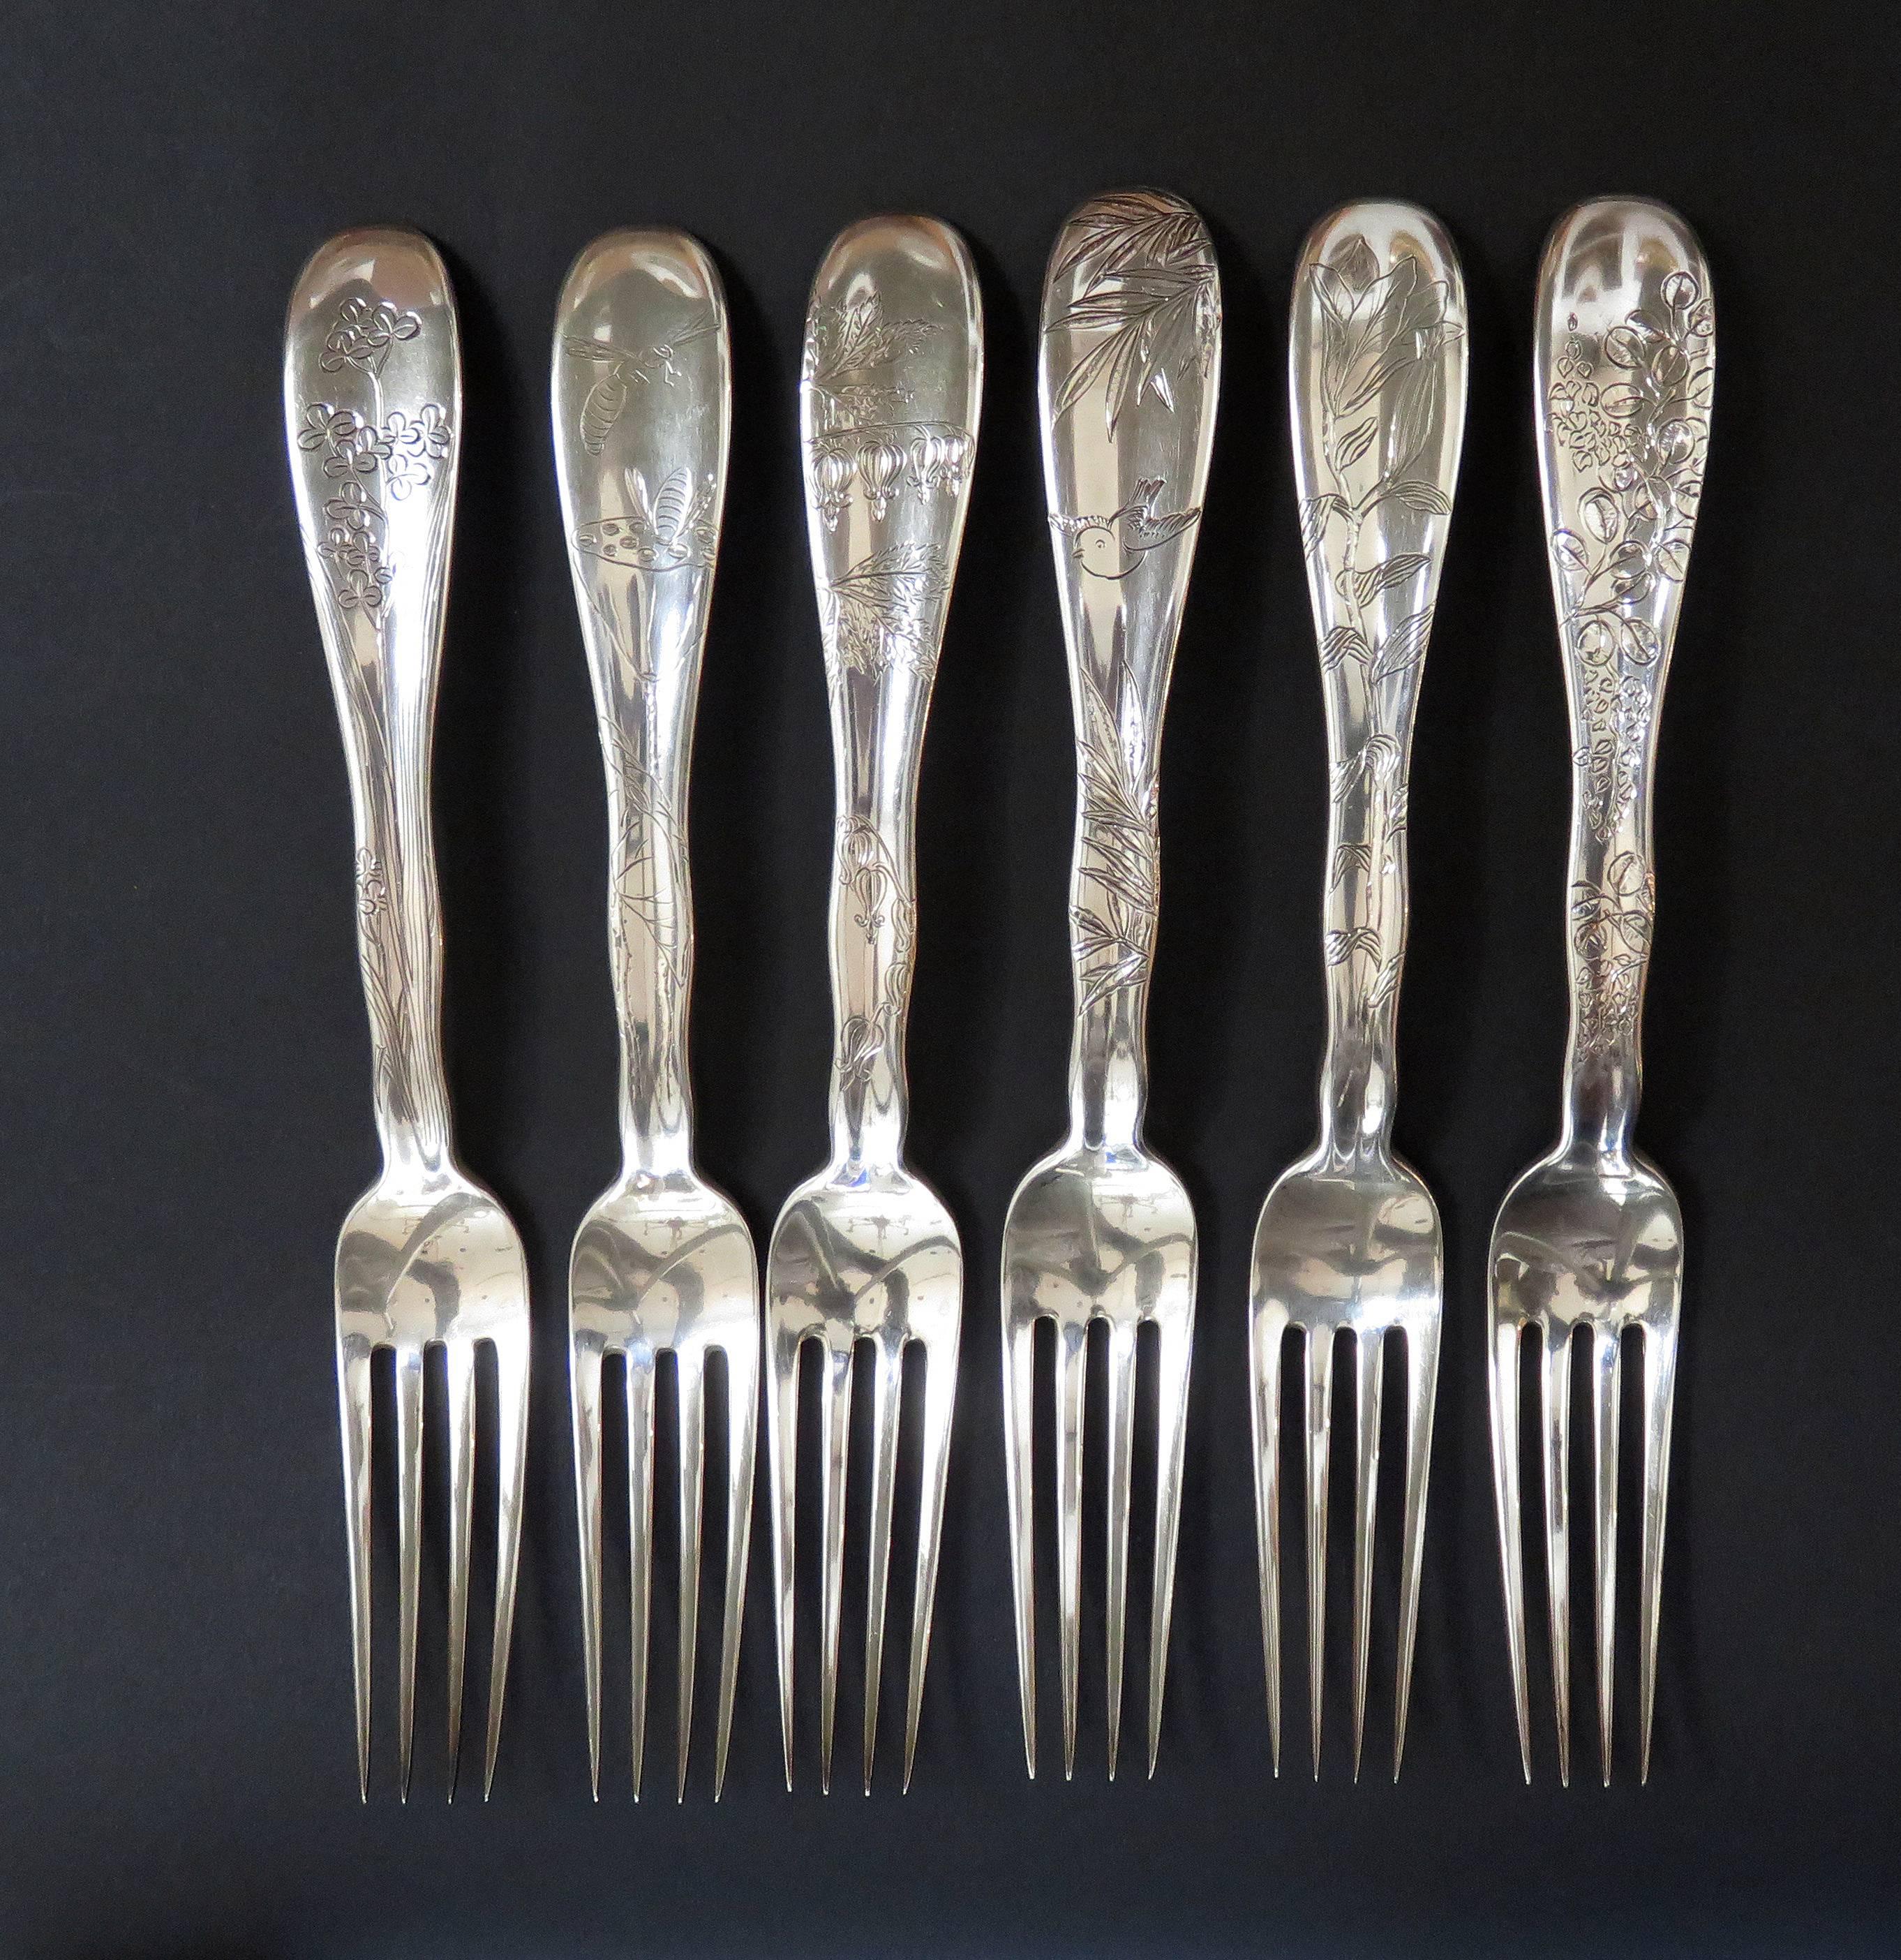 Tiffany & Company Lap over Edge Acid Etched Dinner Forks, circa 1880 In Good Condition For Sale In San Francisco, CA